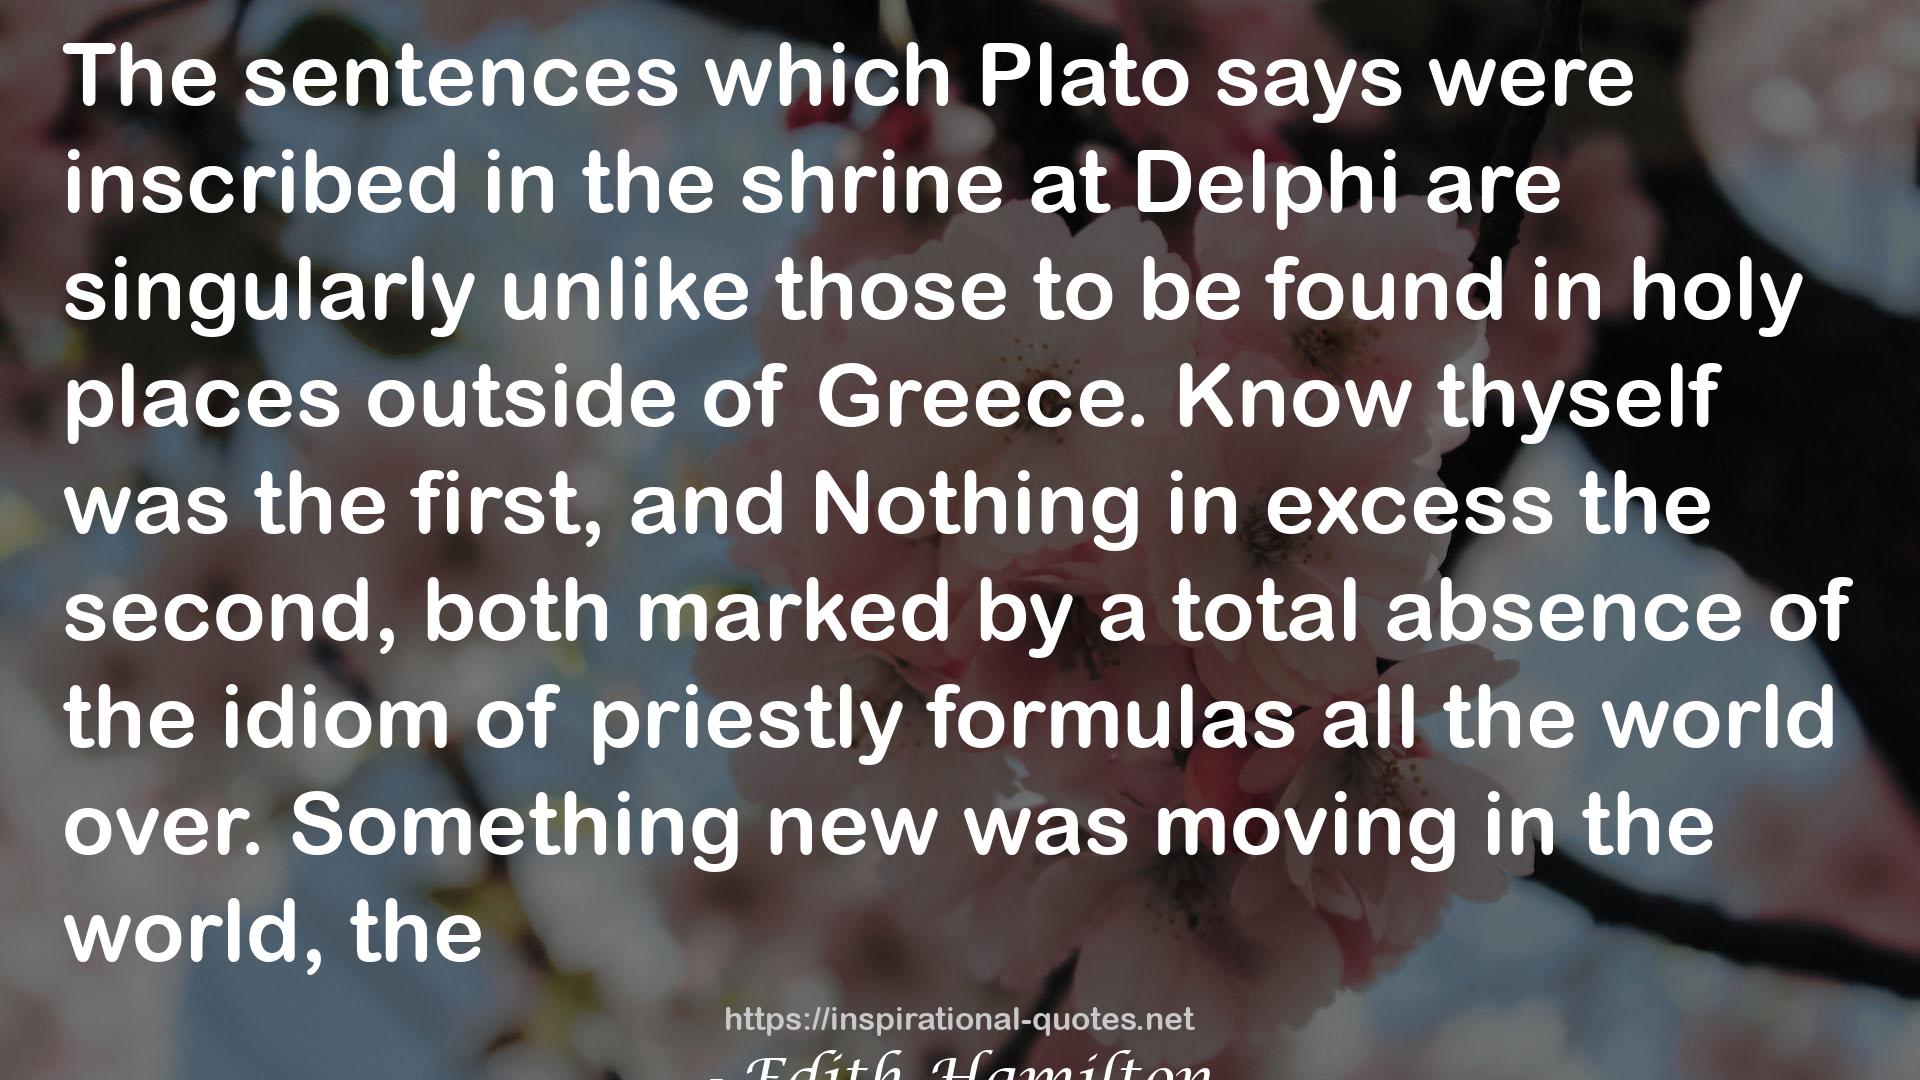 The Greek Way QUOTES